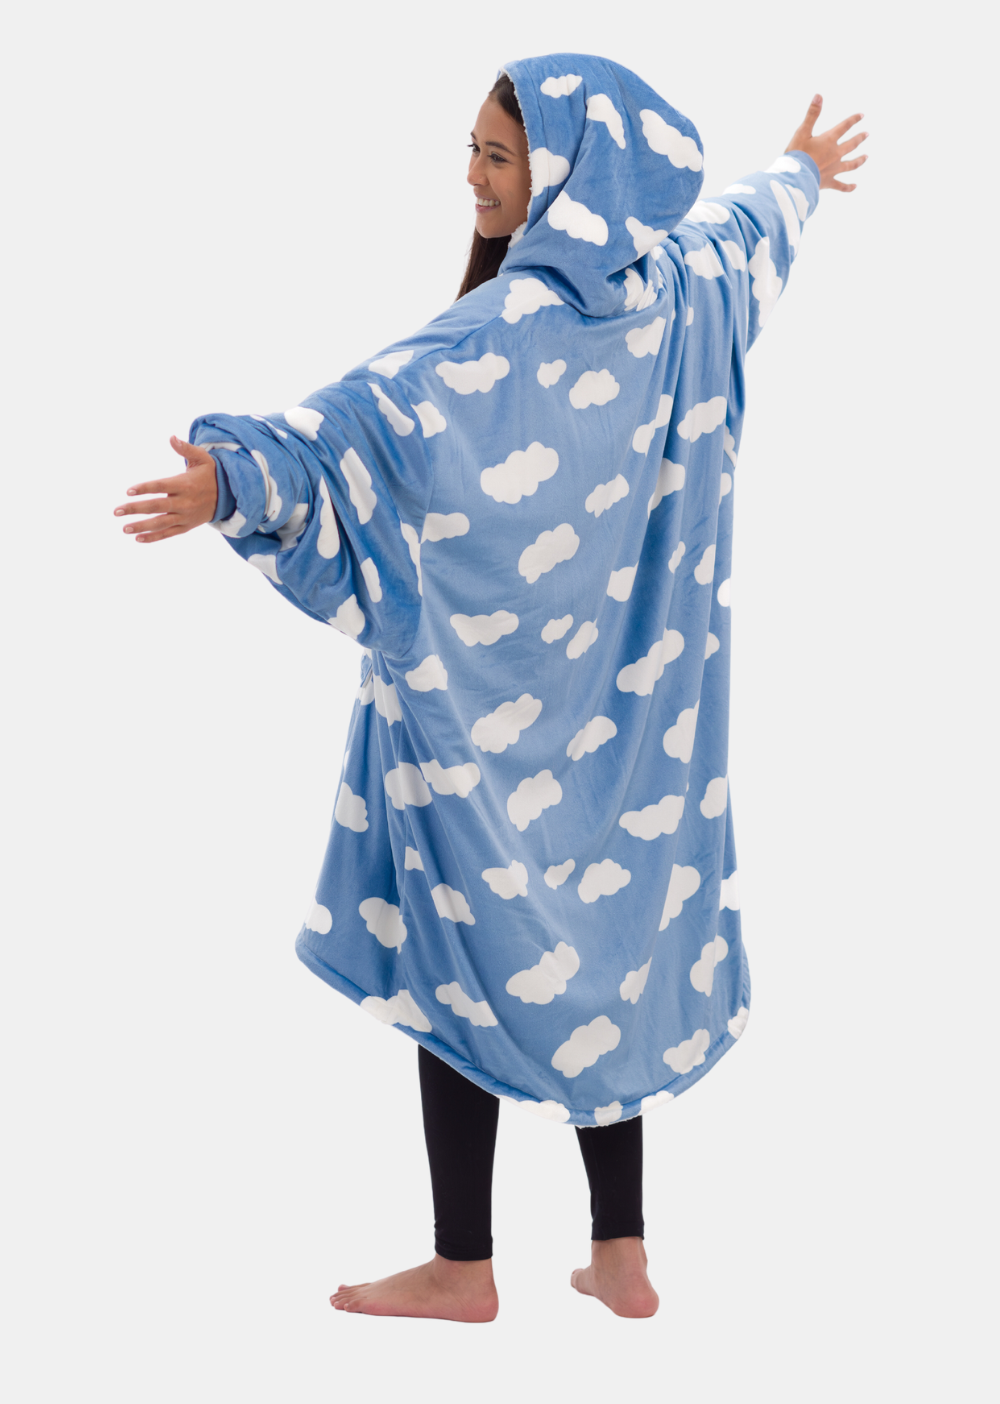 The Comfy® Original Wearable Blanket in 3 Colours